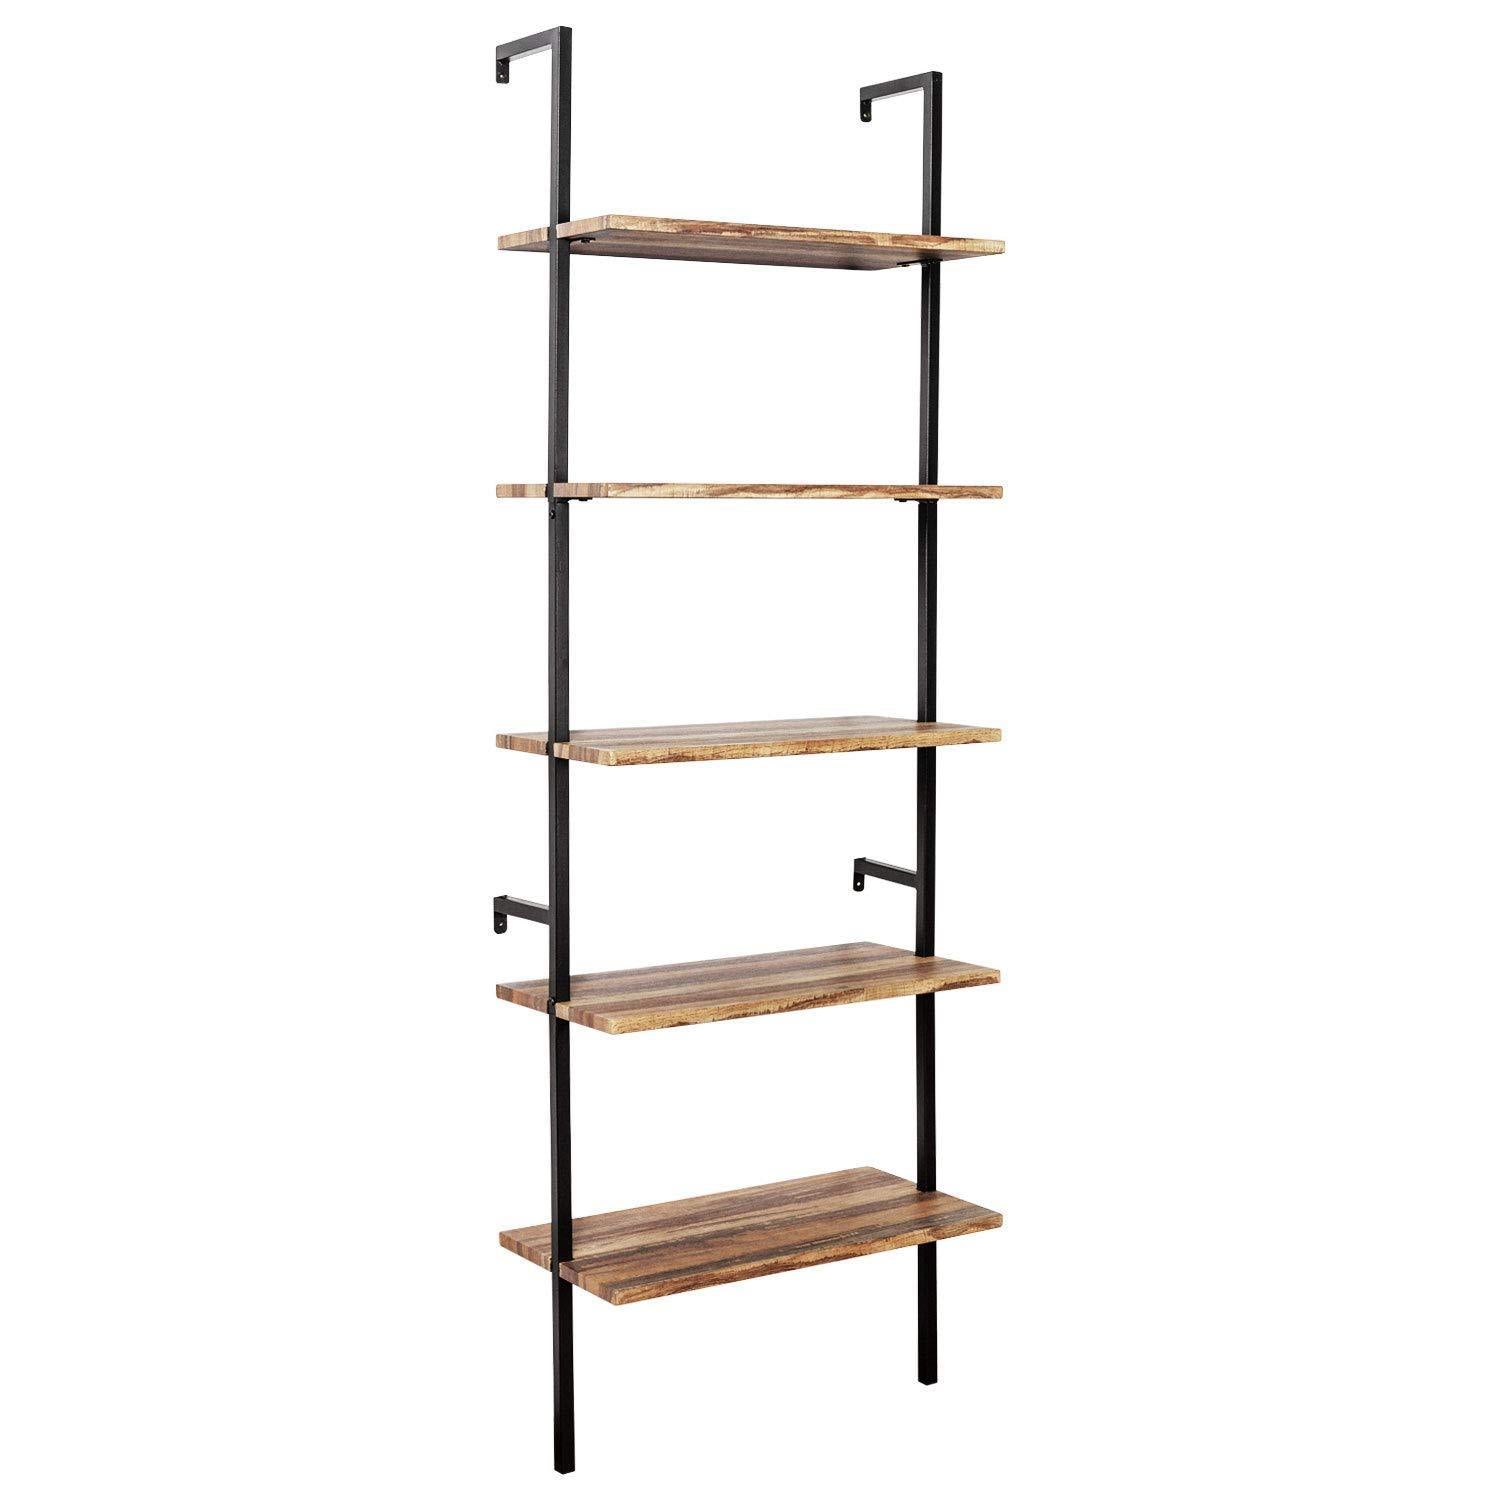 Results ironck industrial ladder shelf bookcase 5 tier wood shelves wall mounted stable expand space bookshelf retro wall decor furniture for living room kitchen bar storage